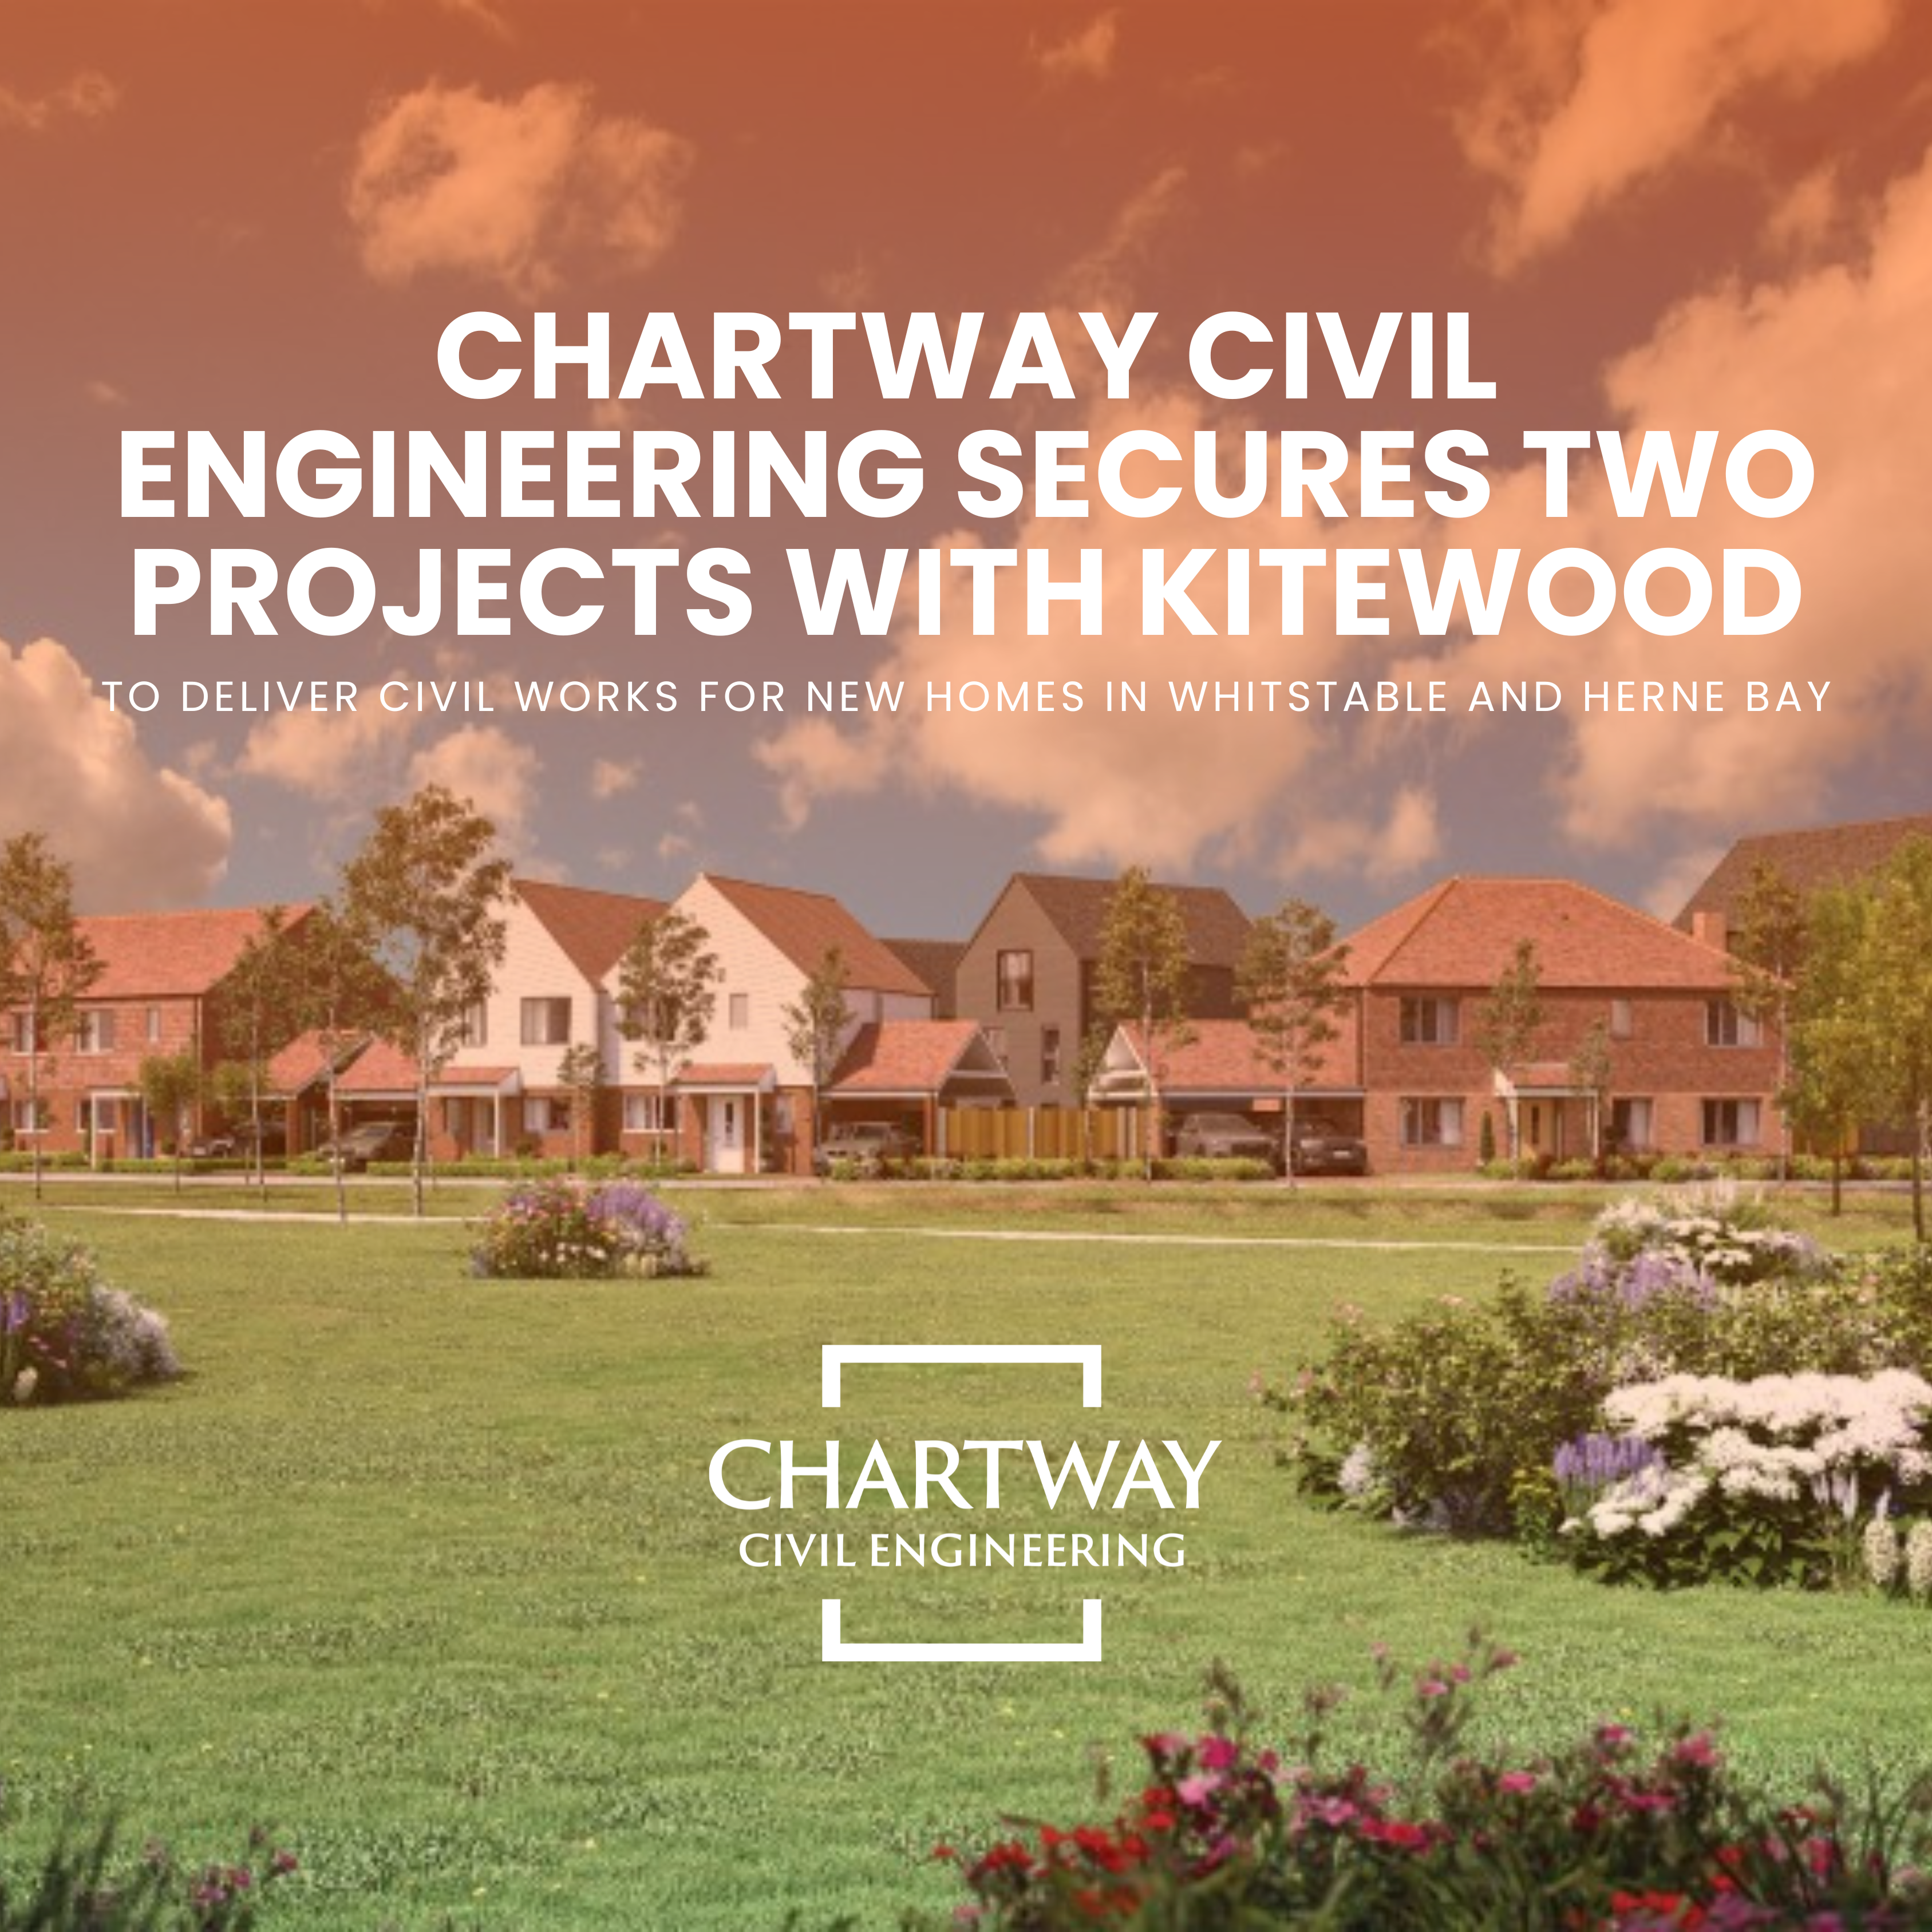 CCE secures contracts with Kitewood Estates for two prominent developments in South East England